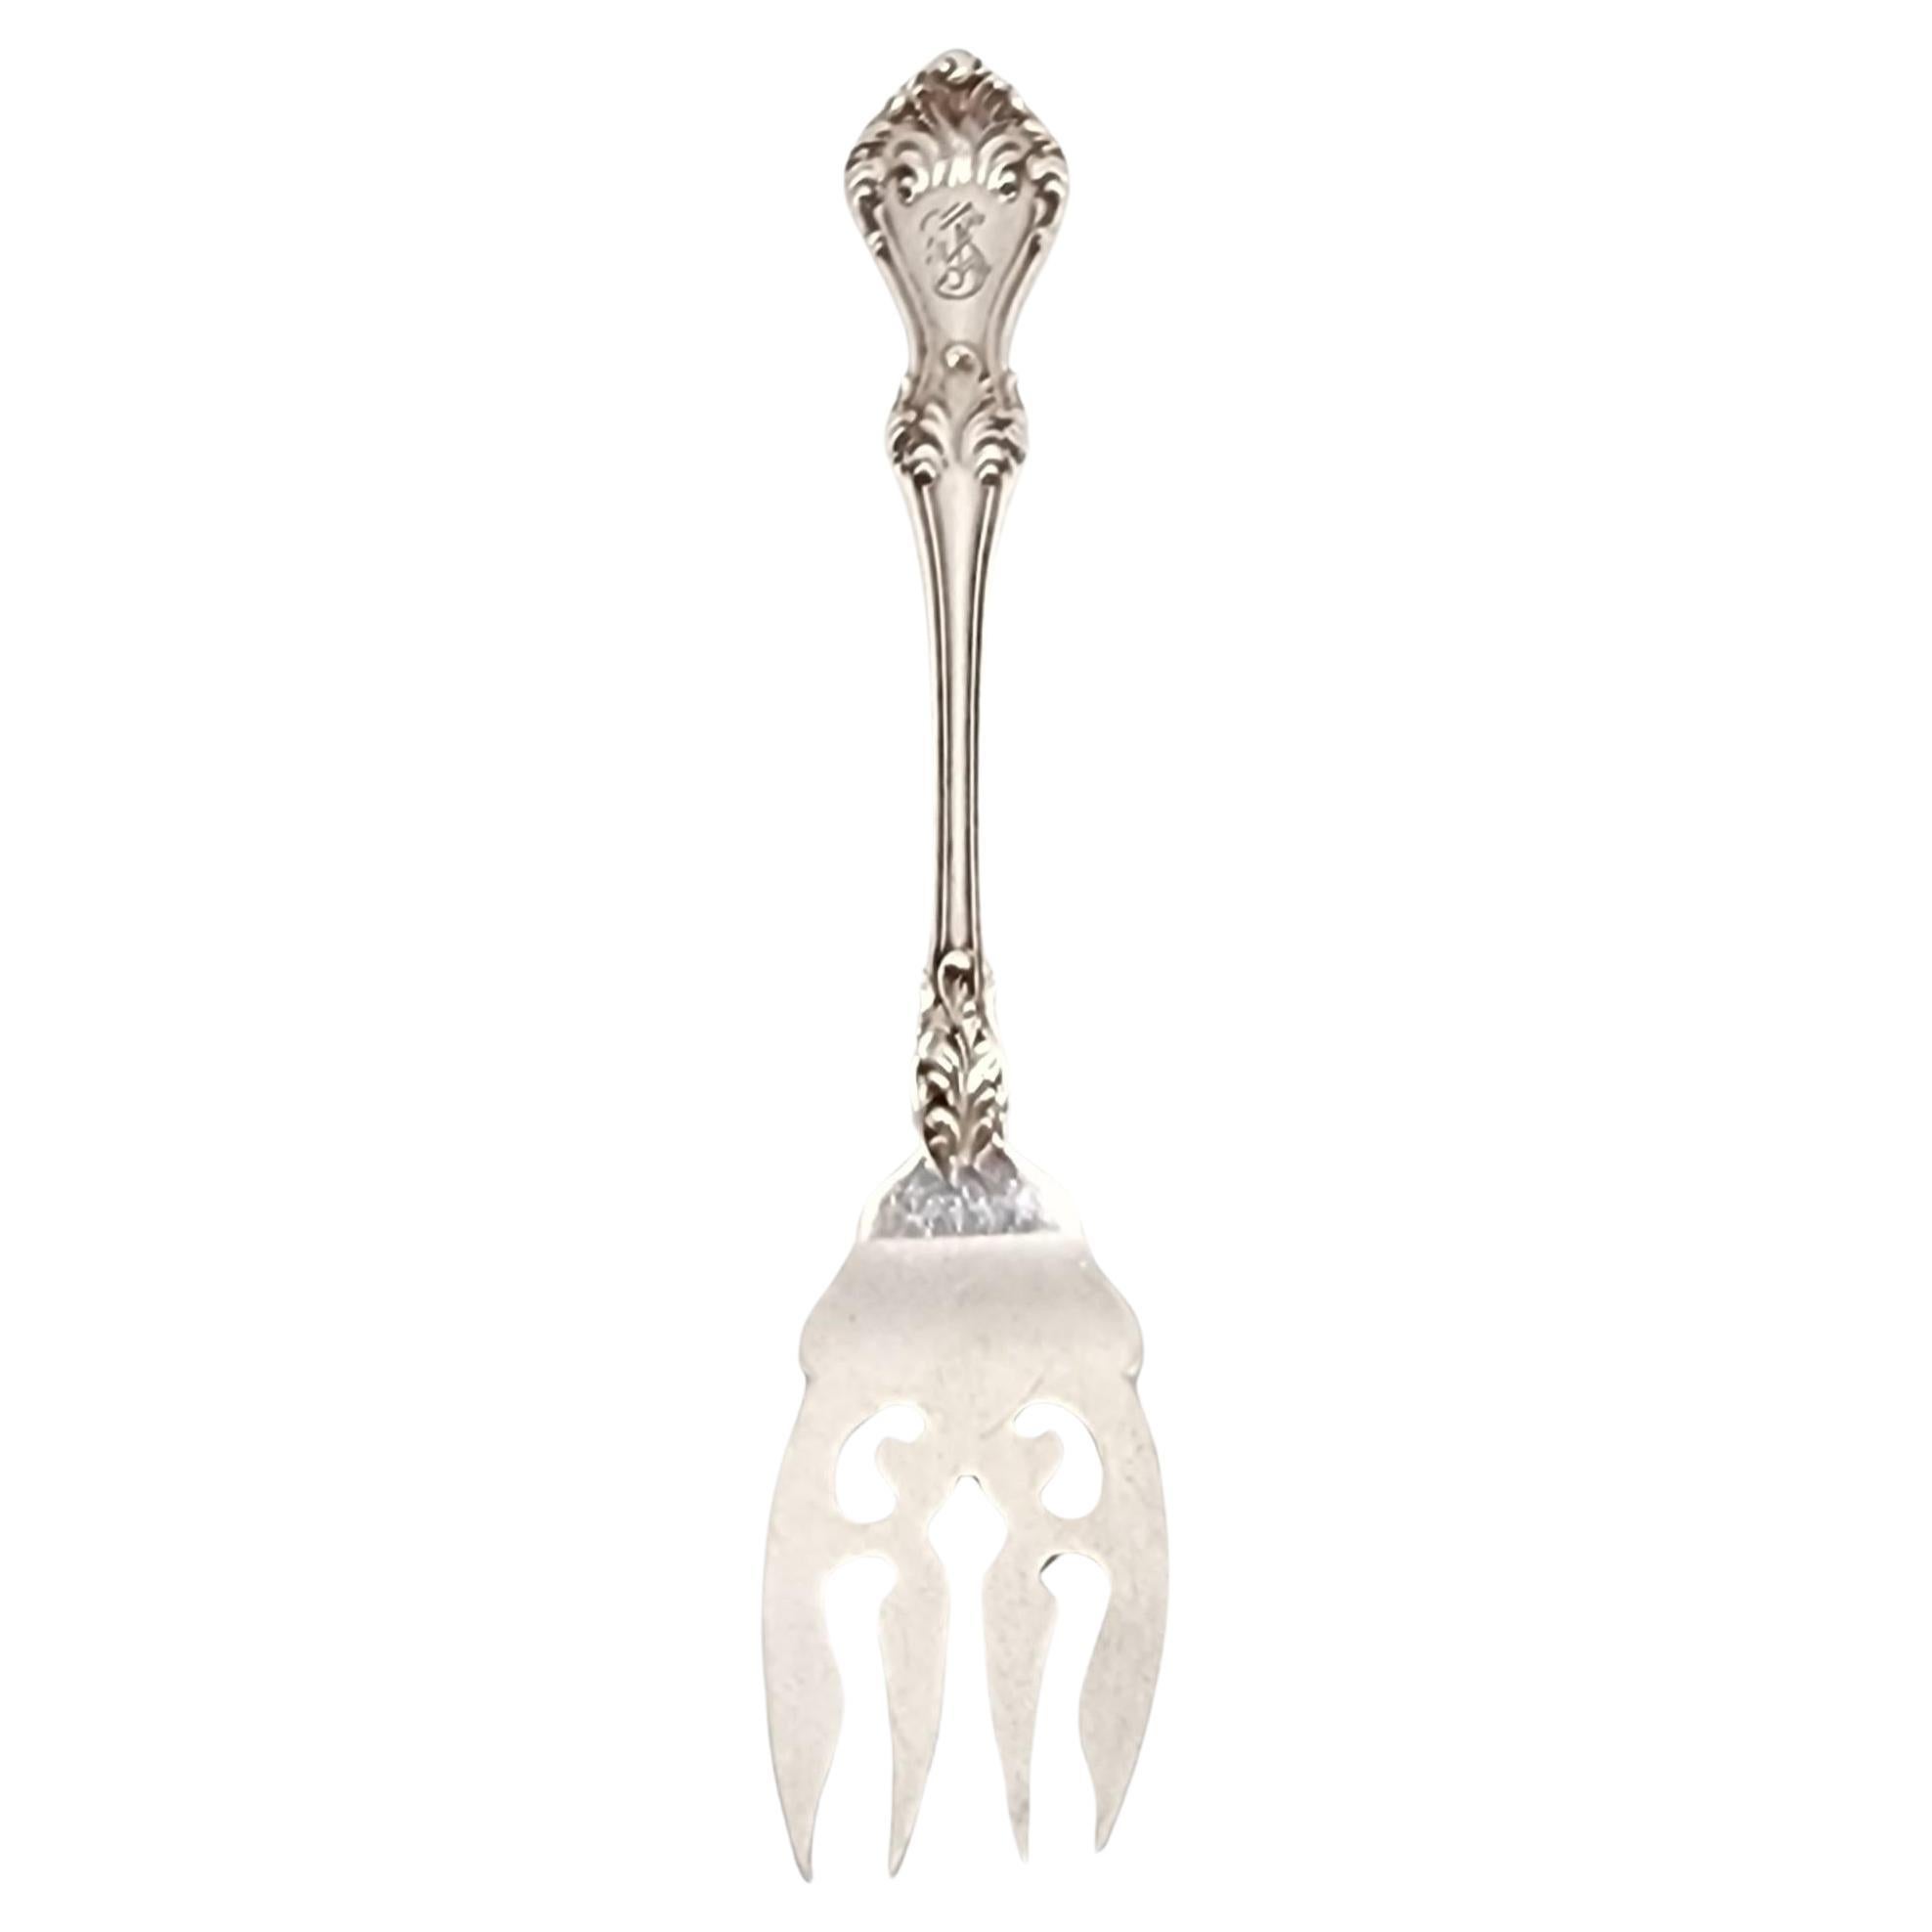 Roger Williams Silver Co Sterling Silver Corinthian Salad Fork w/Monogram #15838 For Sale